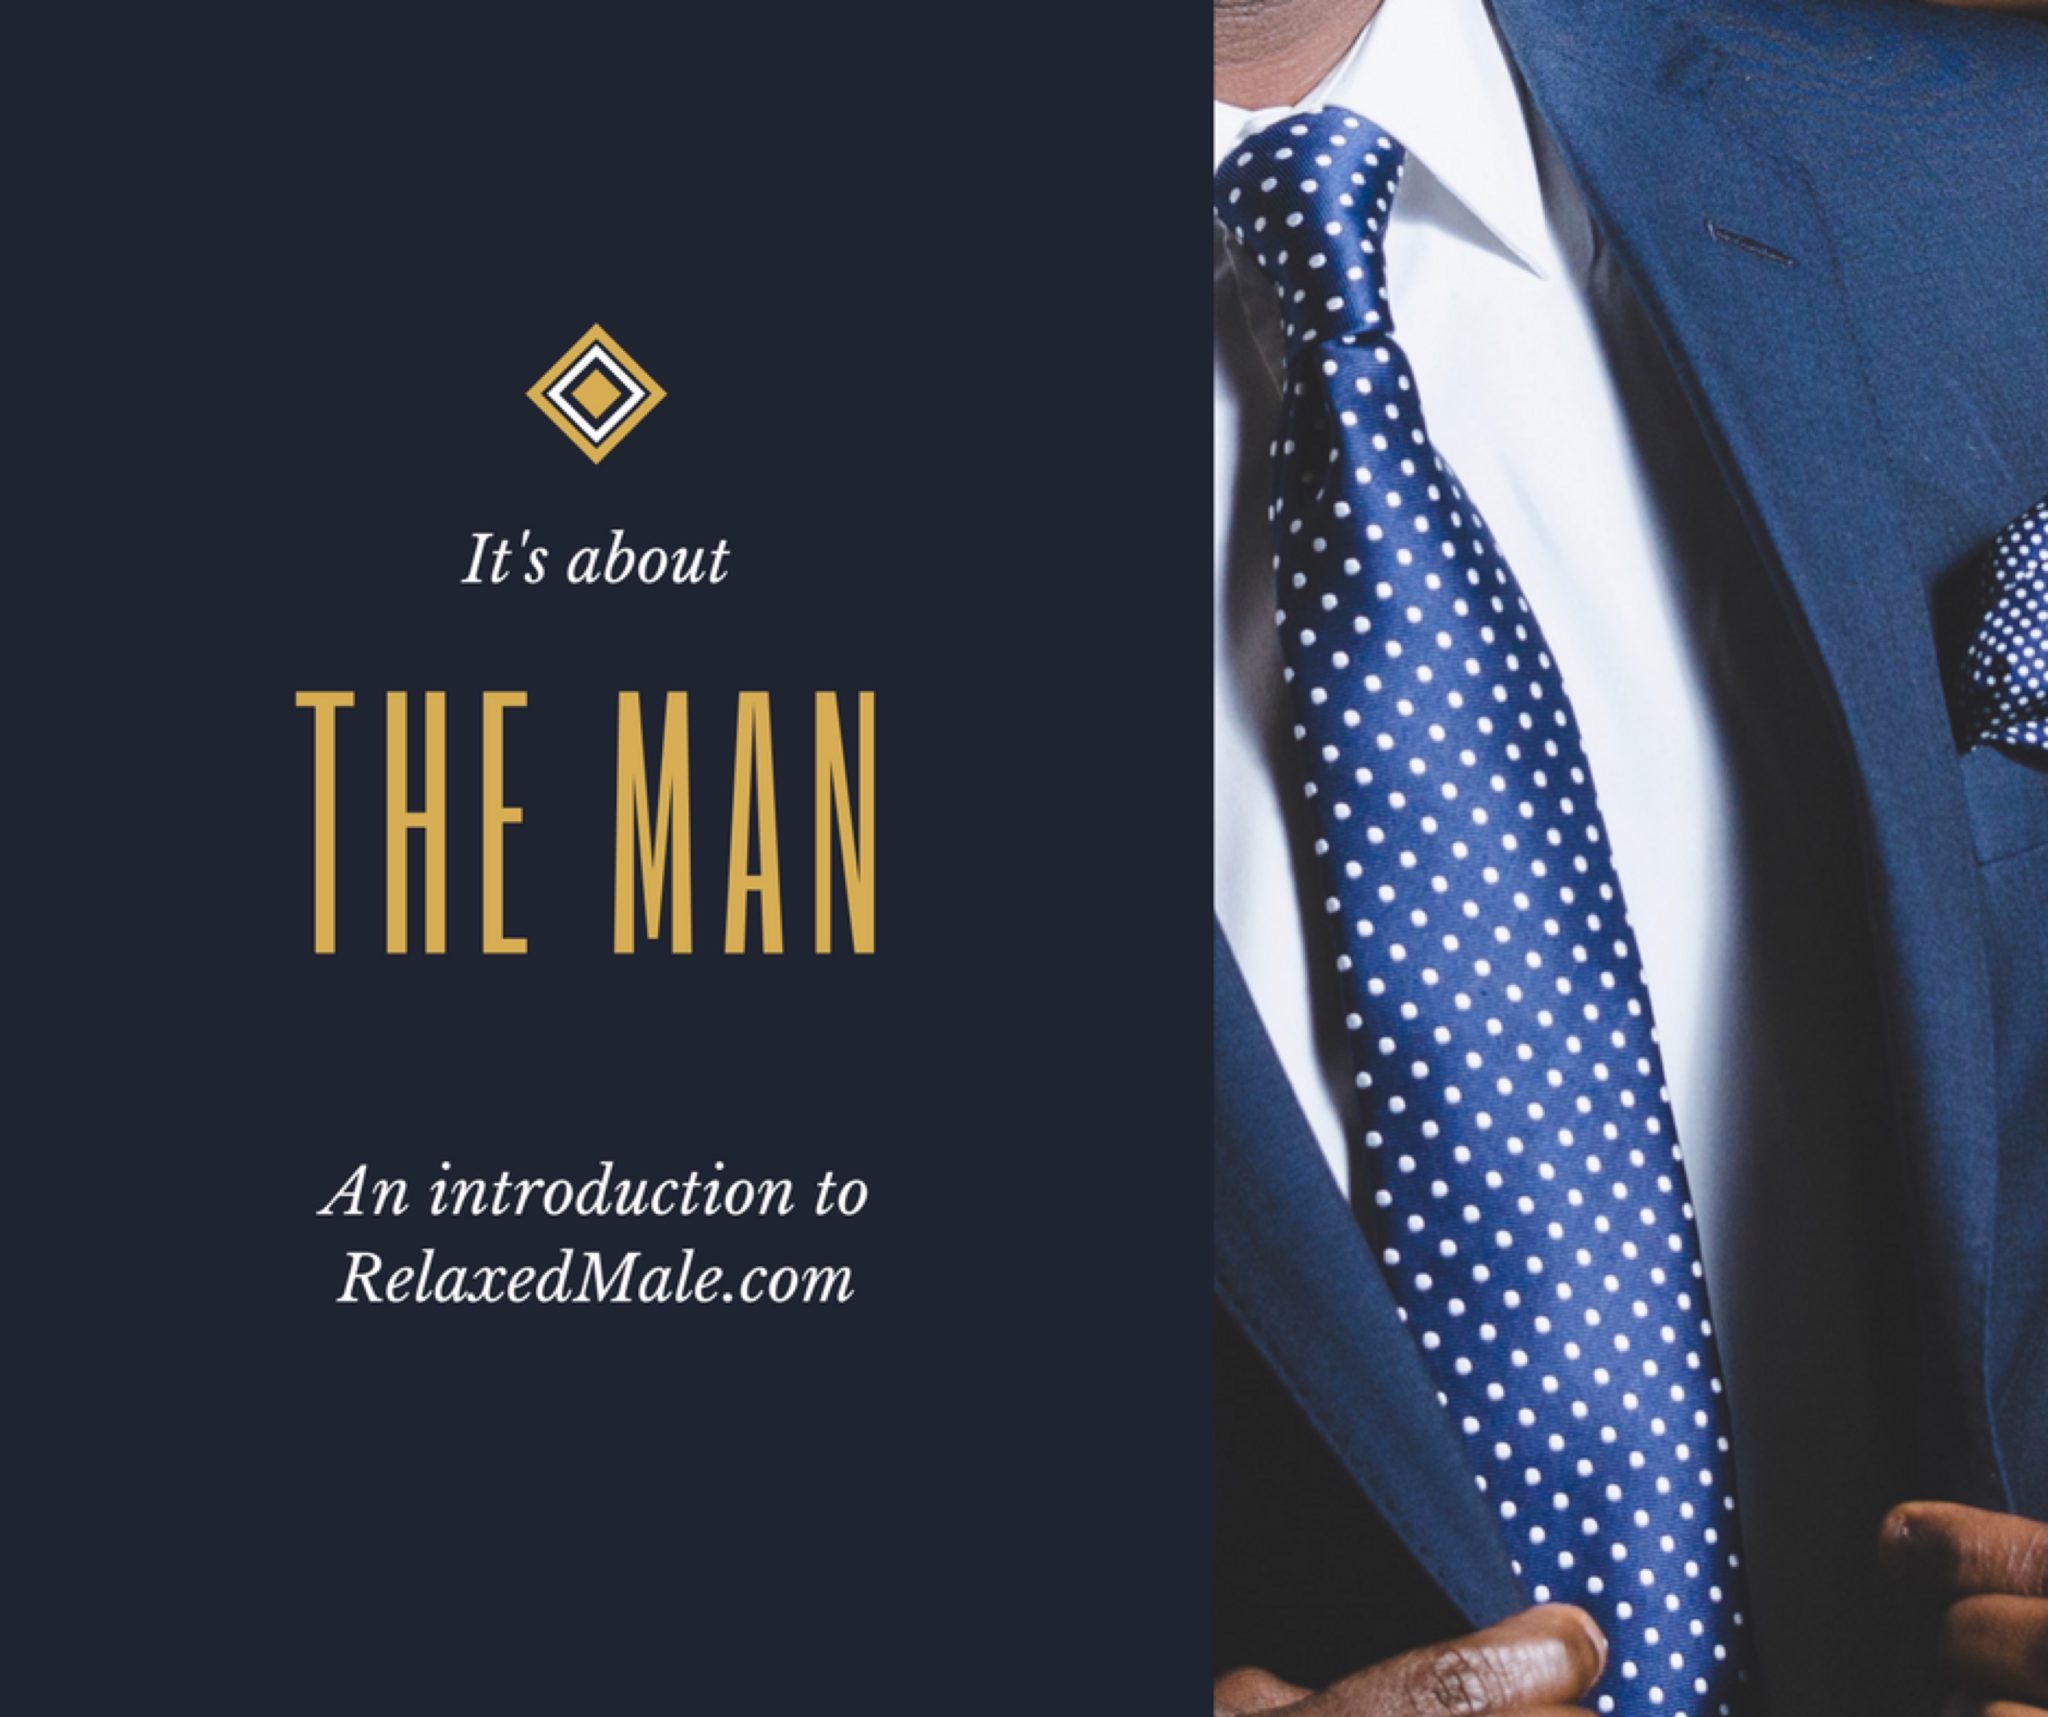 Who is the Relaxed Male? What is their purpose? We talk about it being about the site being for a guy.